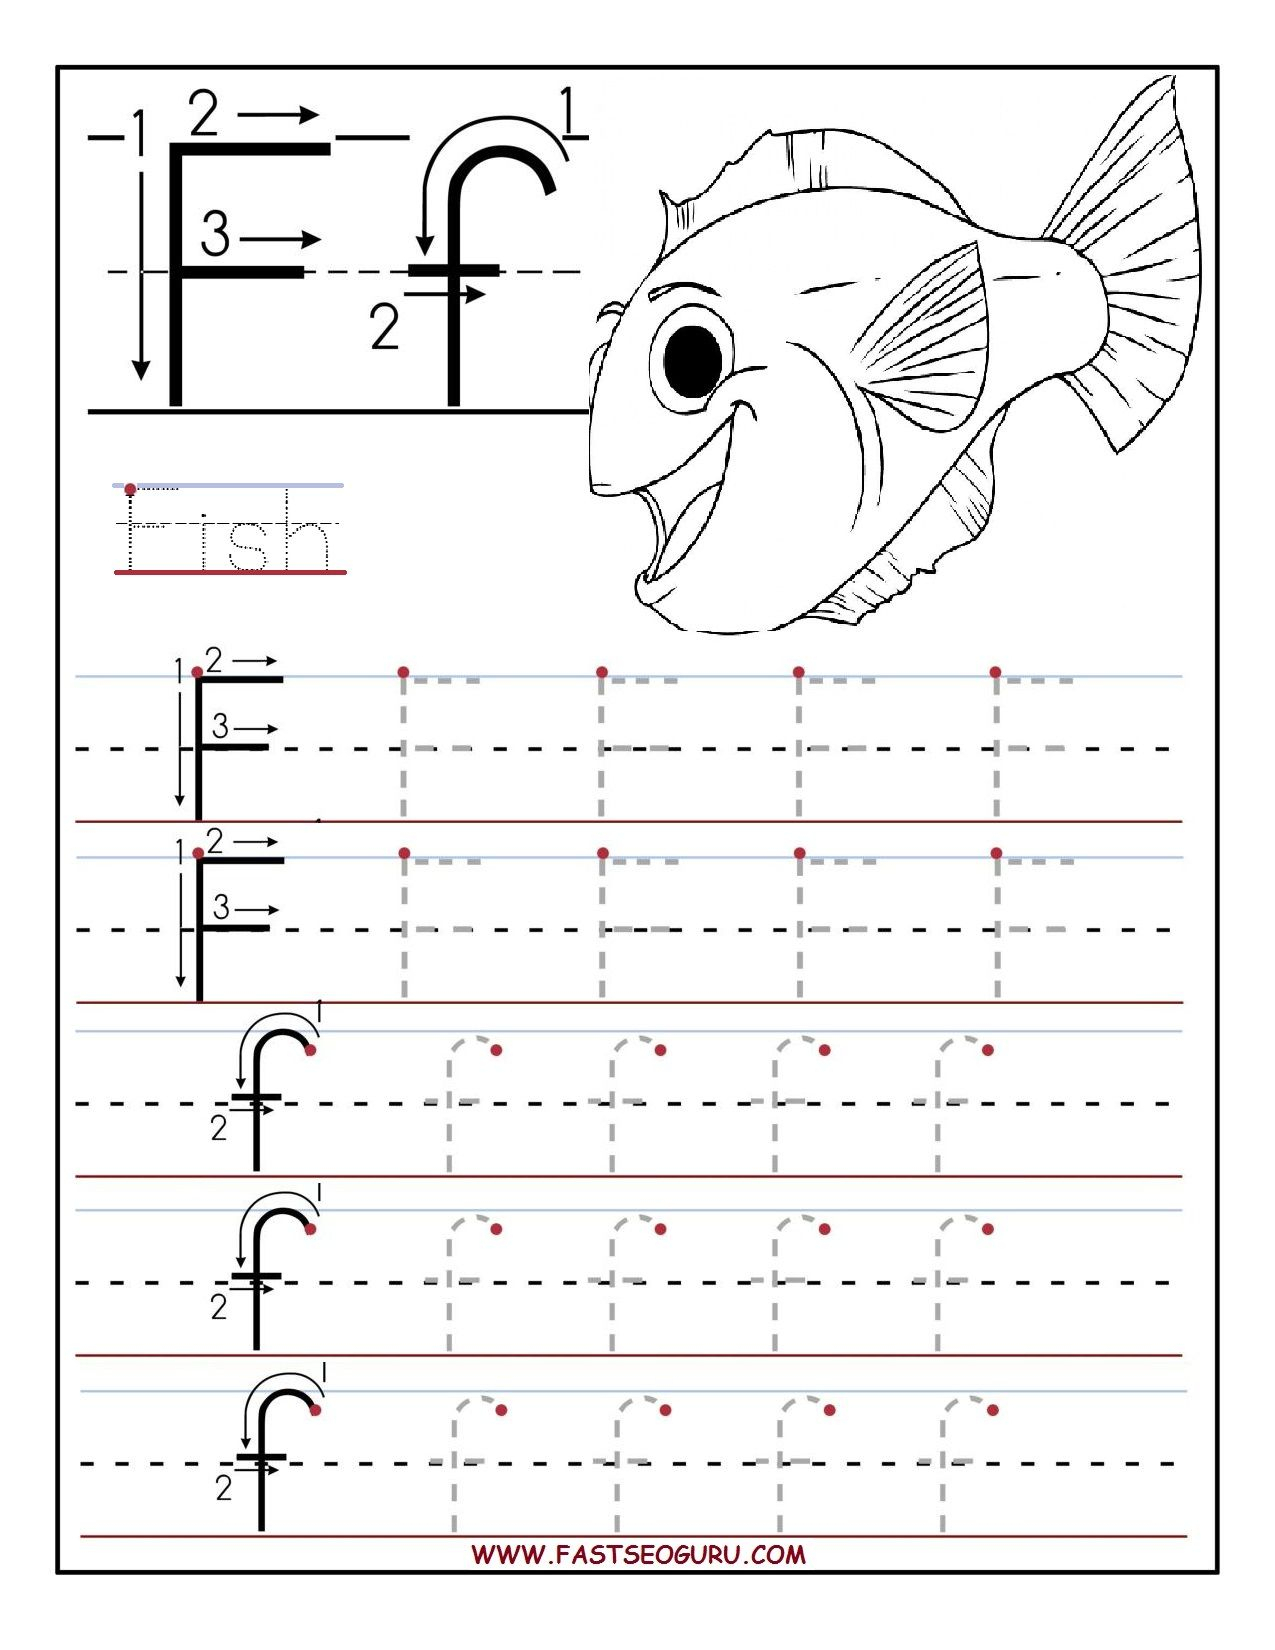 Printable Letter F Tracing Worksheets For Preschool throughout Tracing Letter F Worksheets Preschool